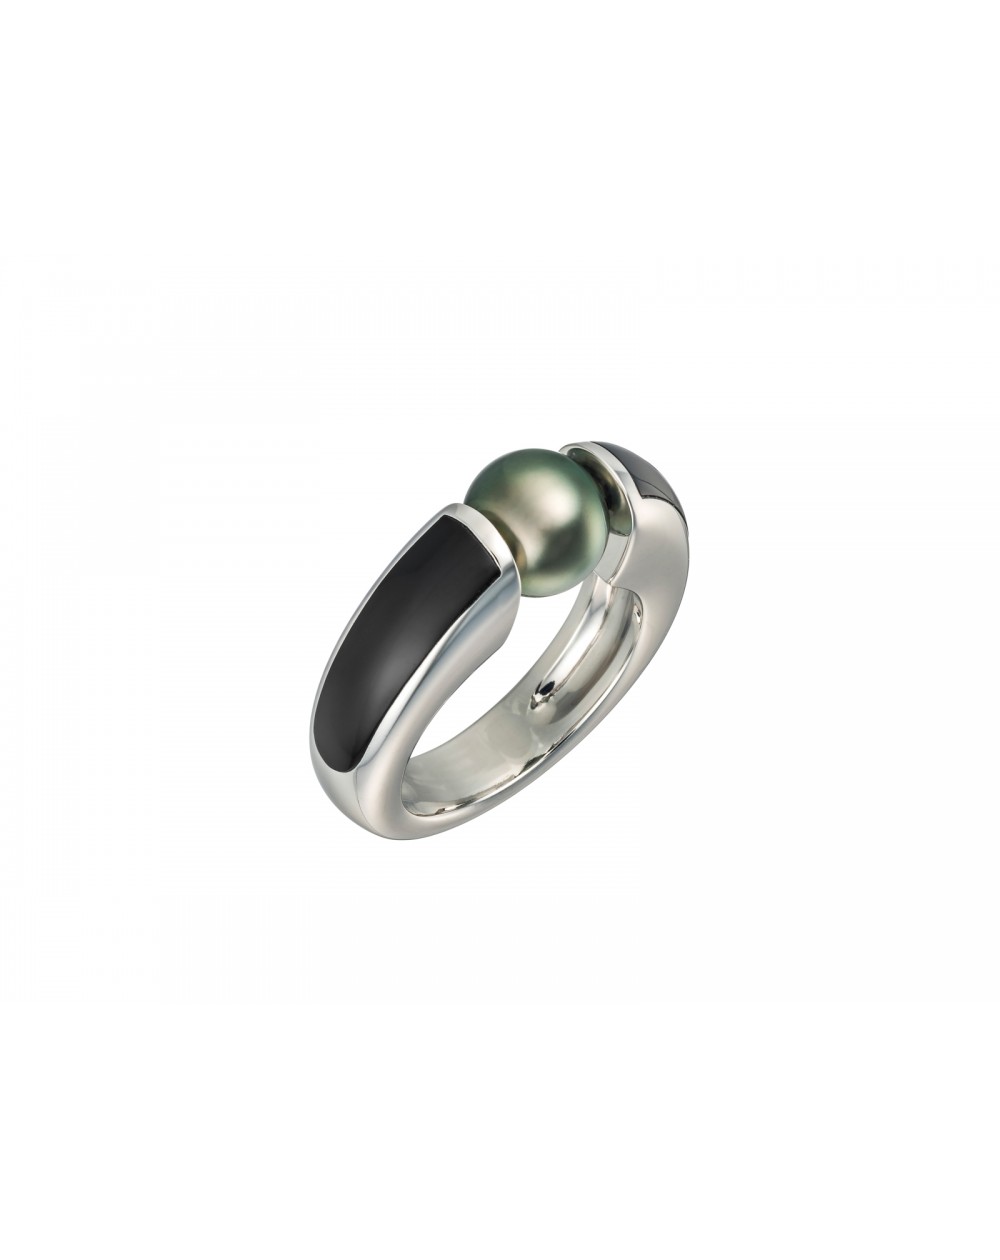 BOUGAINVILLE ring with rounded profile